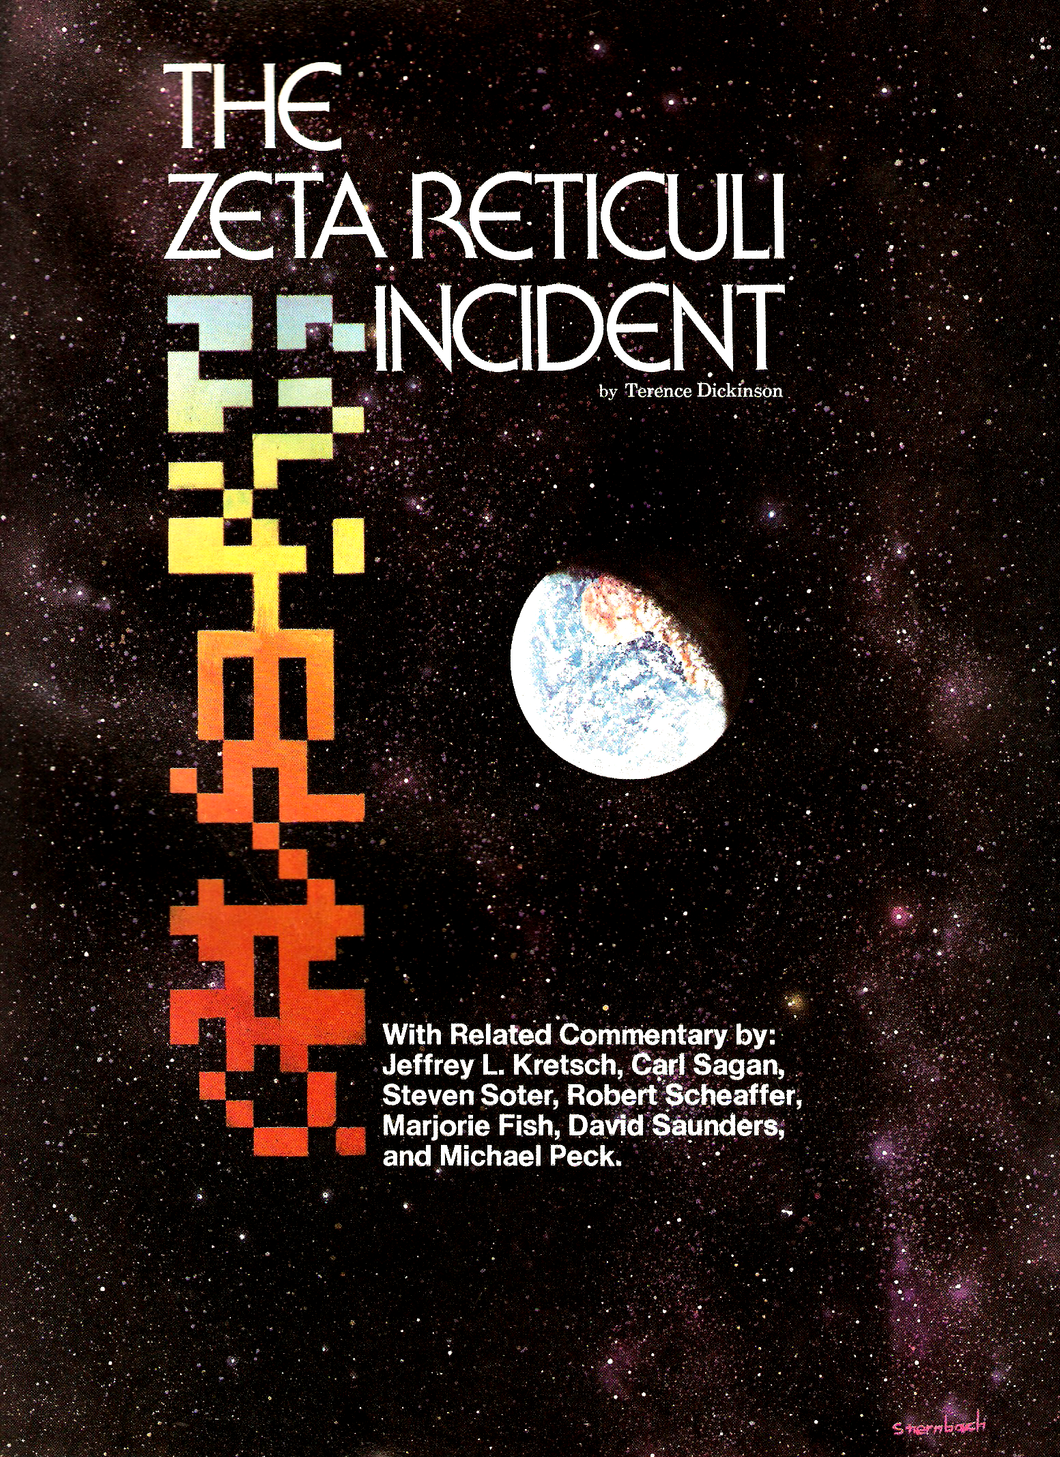 Zeta Reticuli Incident: The Star Map by the Hills. Paperback edition